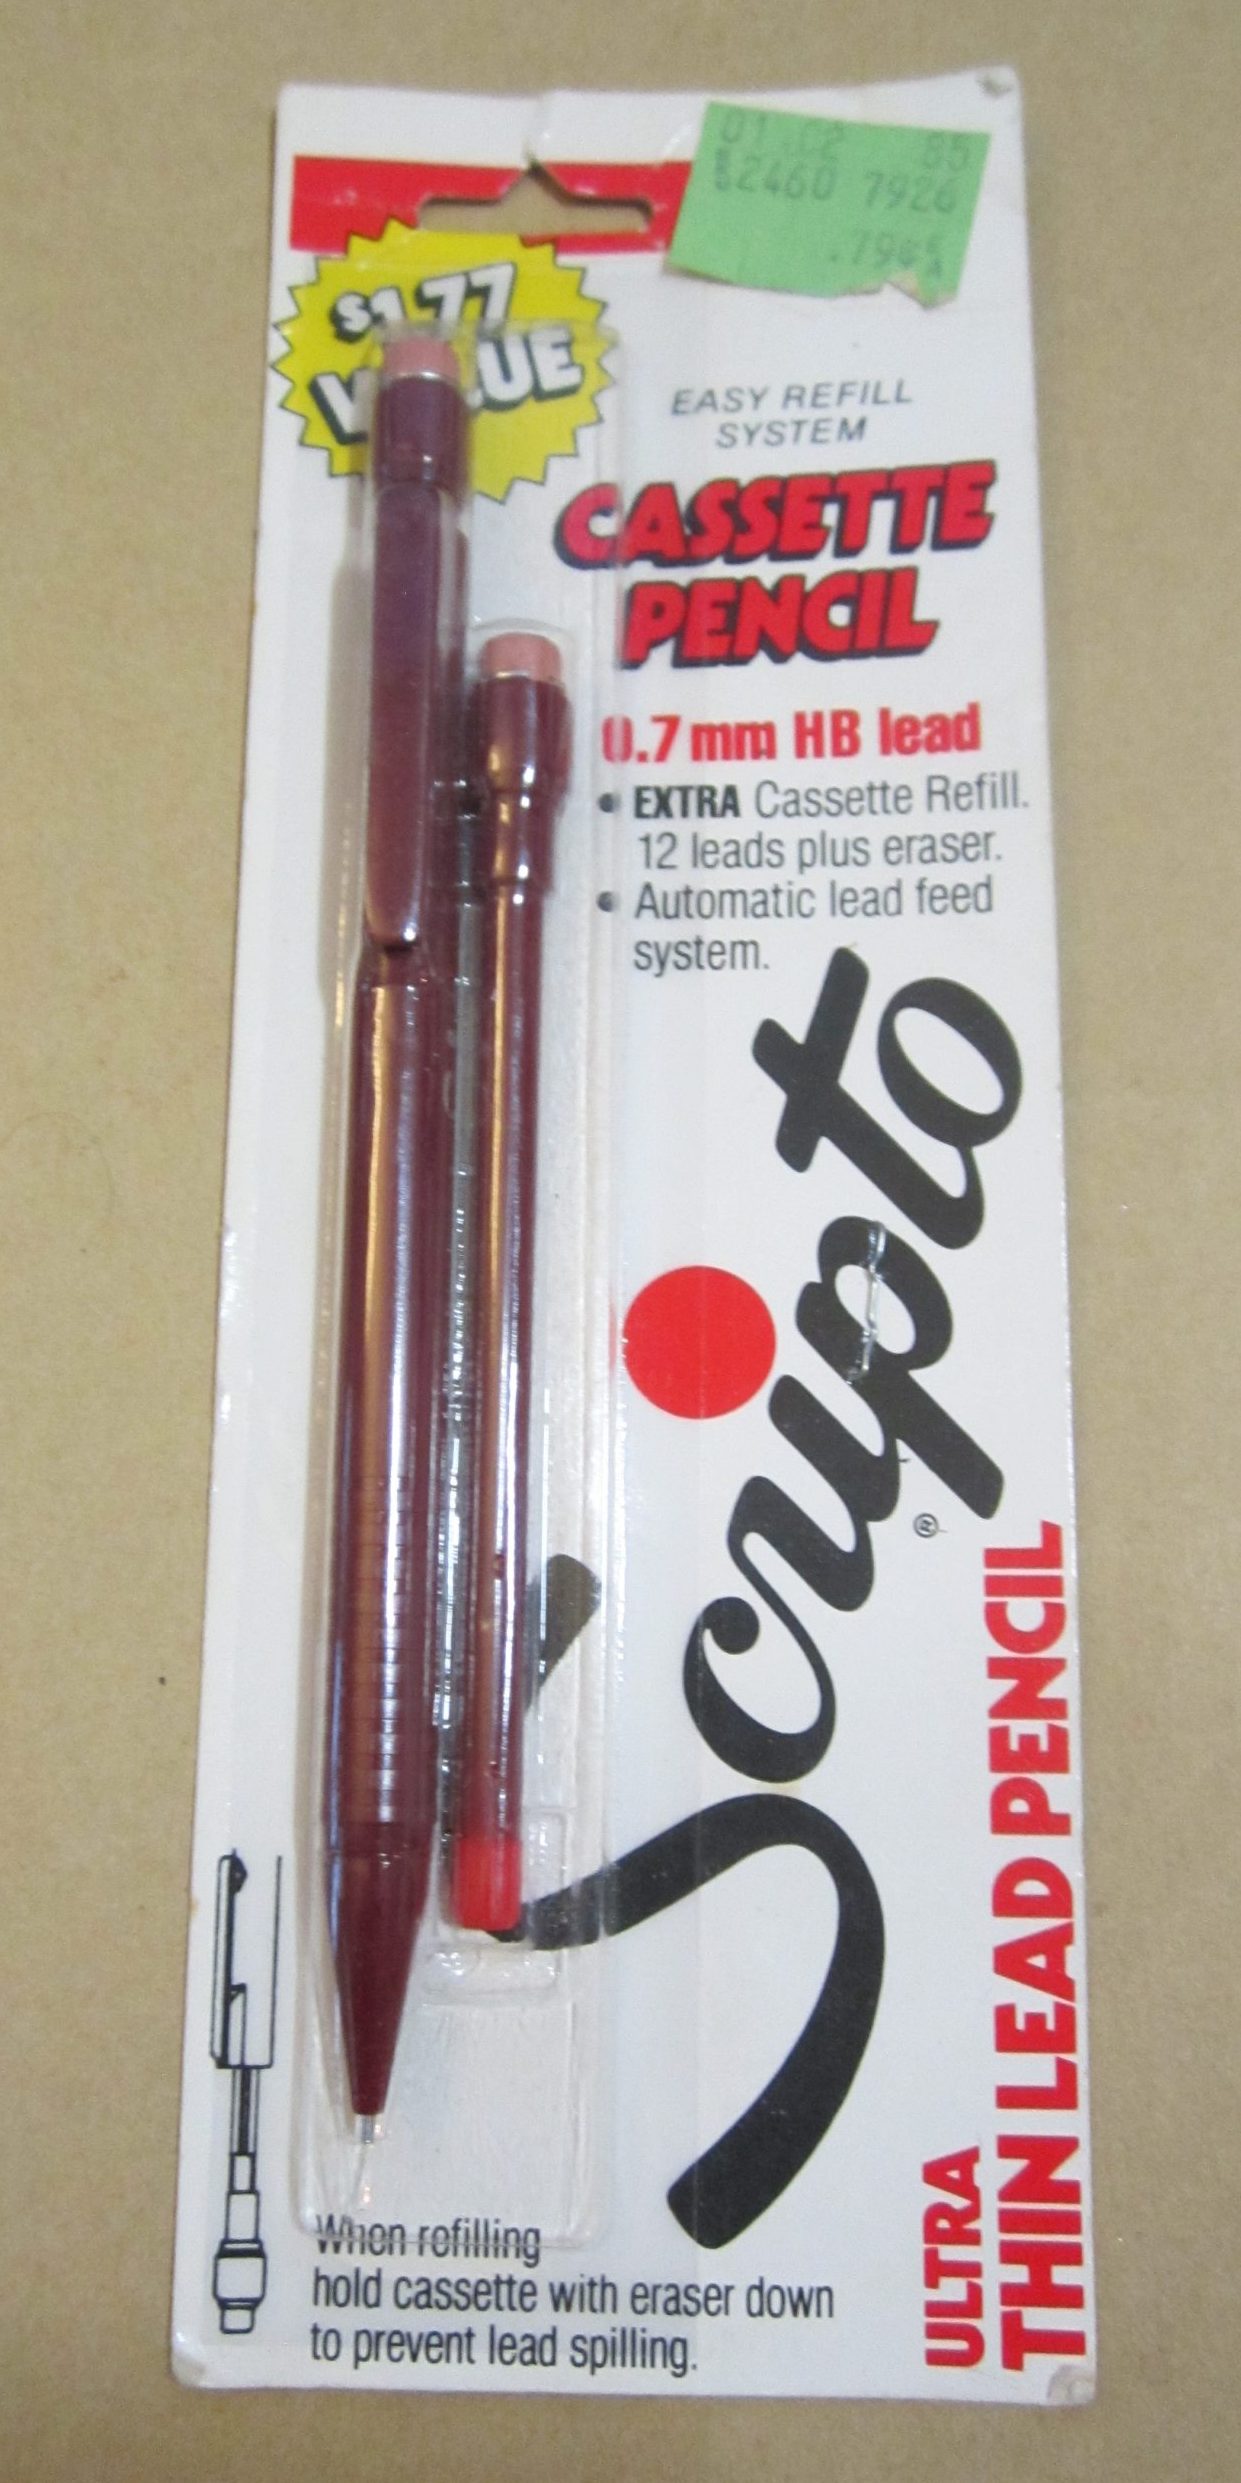 Pen/Pencil Review] Daiso 2 in 1 Pen and Stamp Set – Rhonda Eudaly